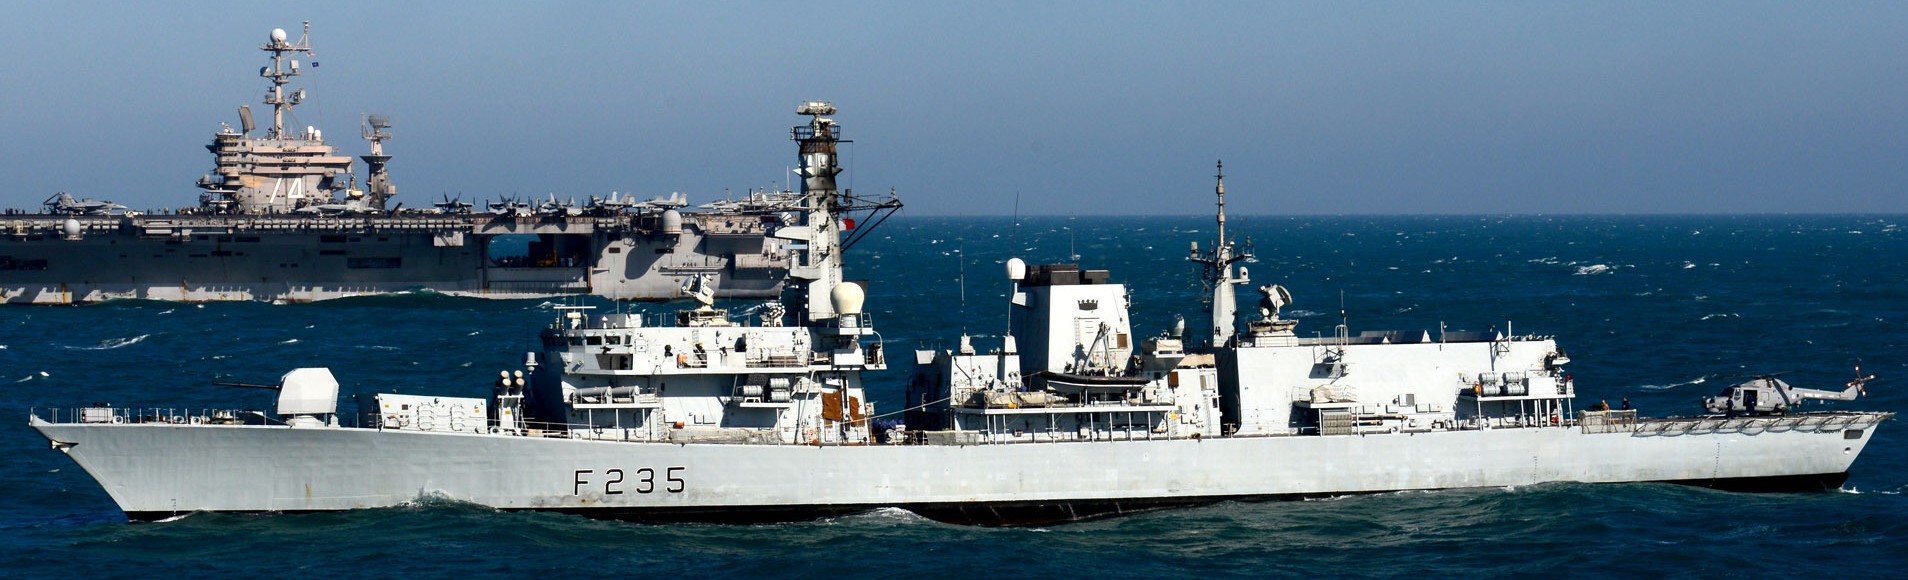 f-235 hms monmouth type 23 duke class guided missile frigate ffg royal navy 43